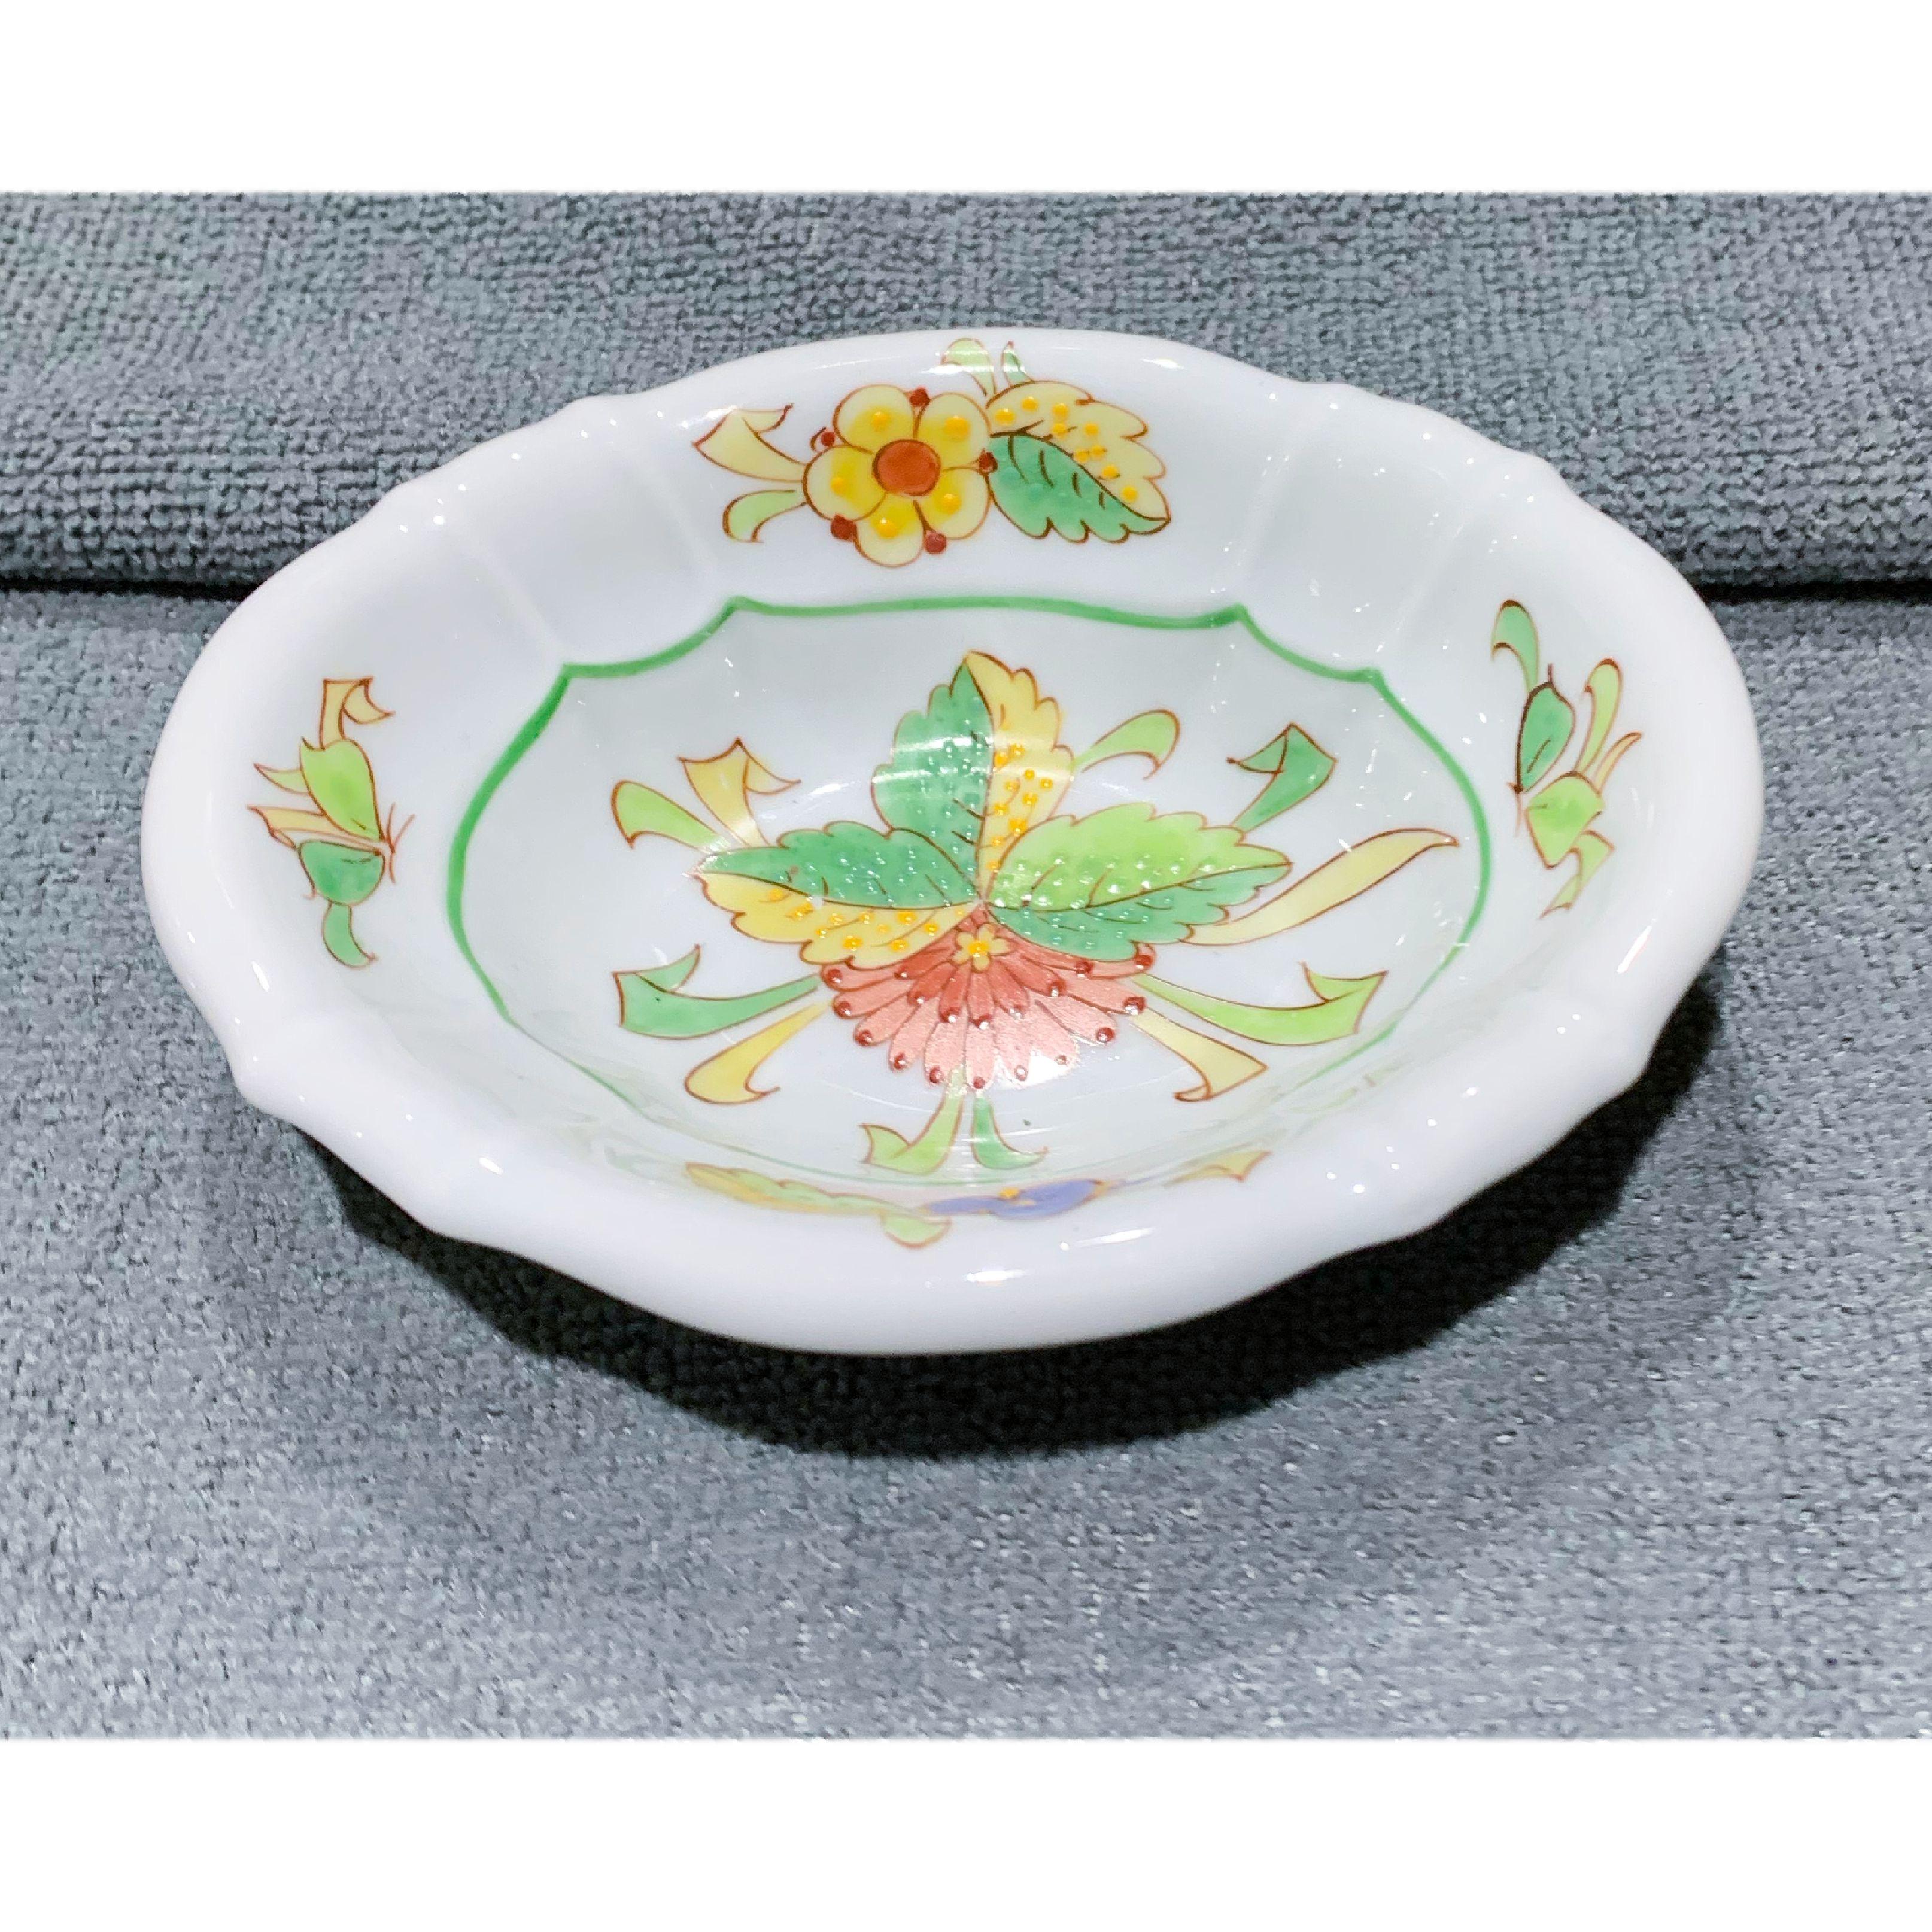 Vintage Sherle Wagner hand painted scalloped ceramic soap dish mums bouquet. Vitreous China. Hand painted and hand decorated item. Mums Bouquet pattern applied by hand, multiple firings at high temperatures. Executed by a single artisan who ensures